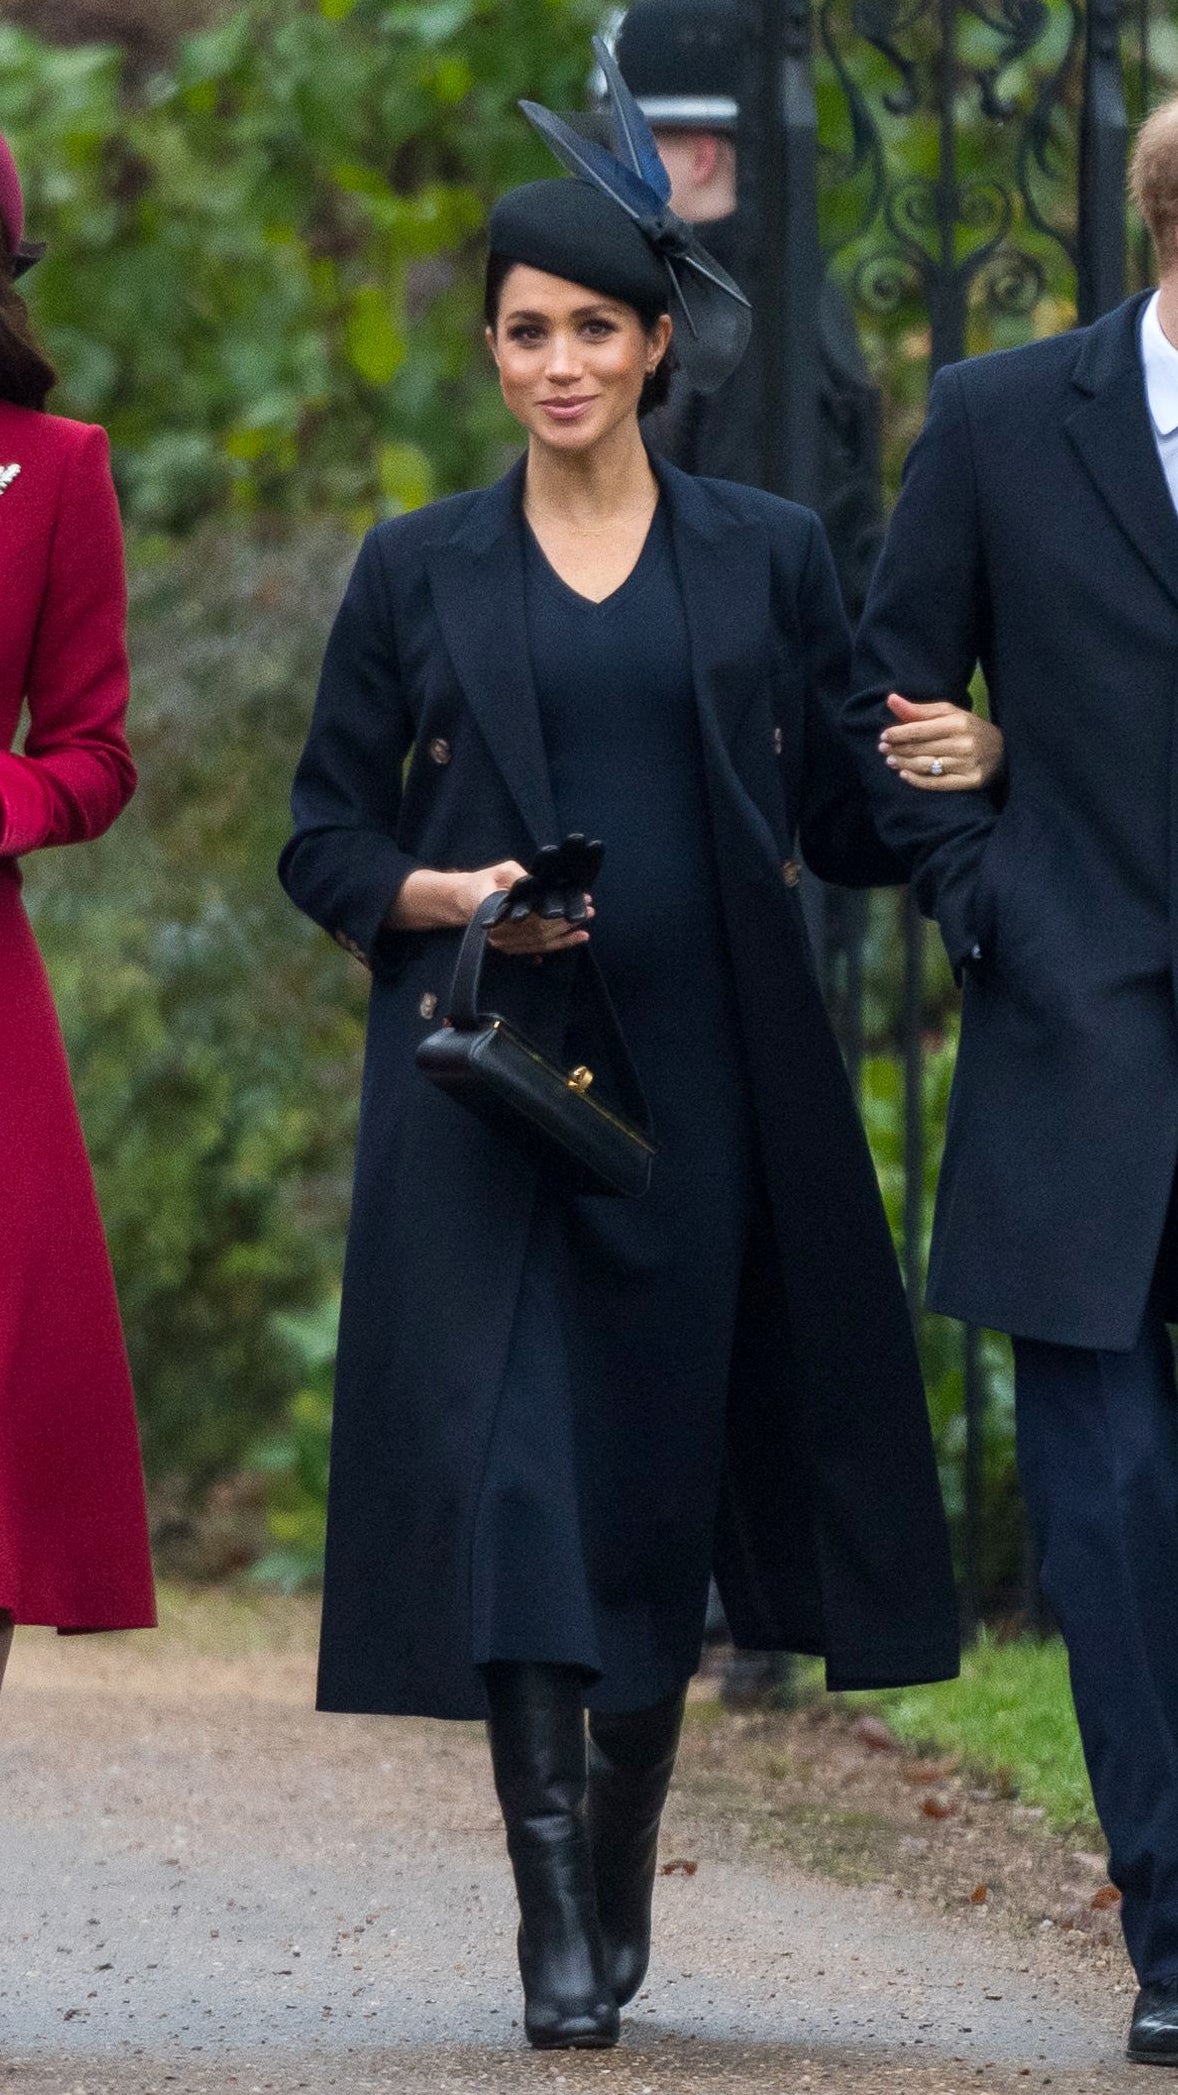 Meghan Markle’s endorsement of Victoria Beckham’s clothes did not inspire other women to wear them.